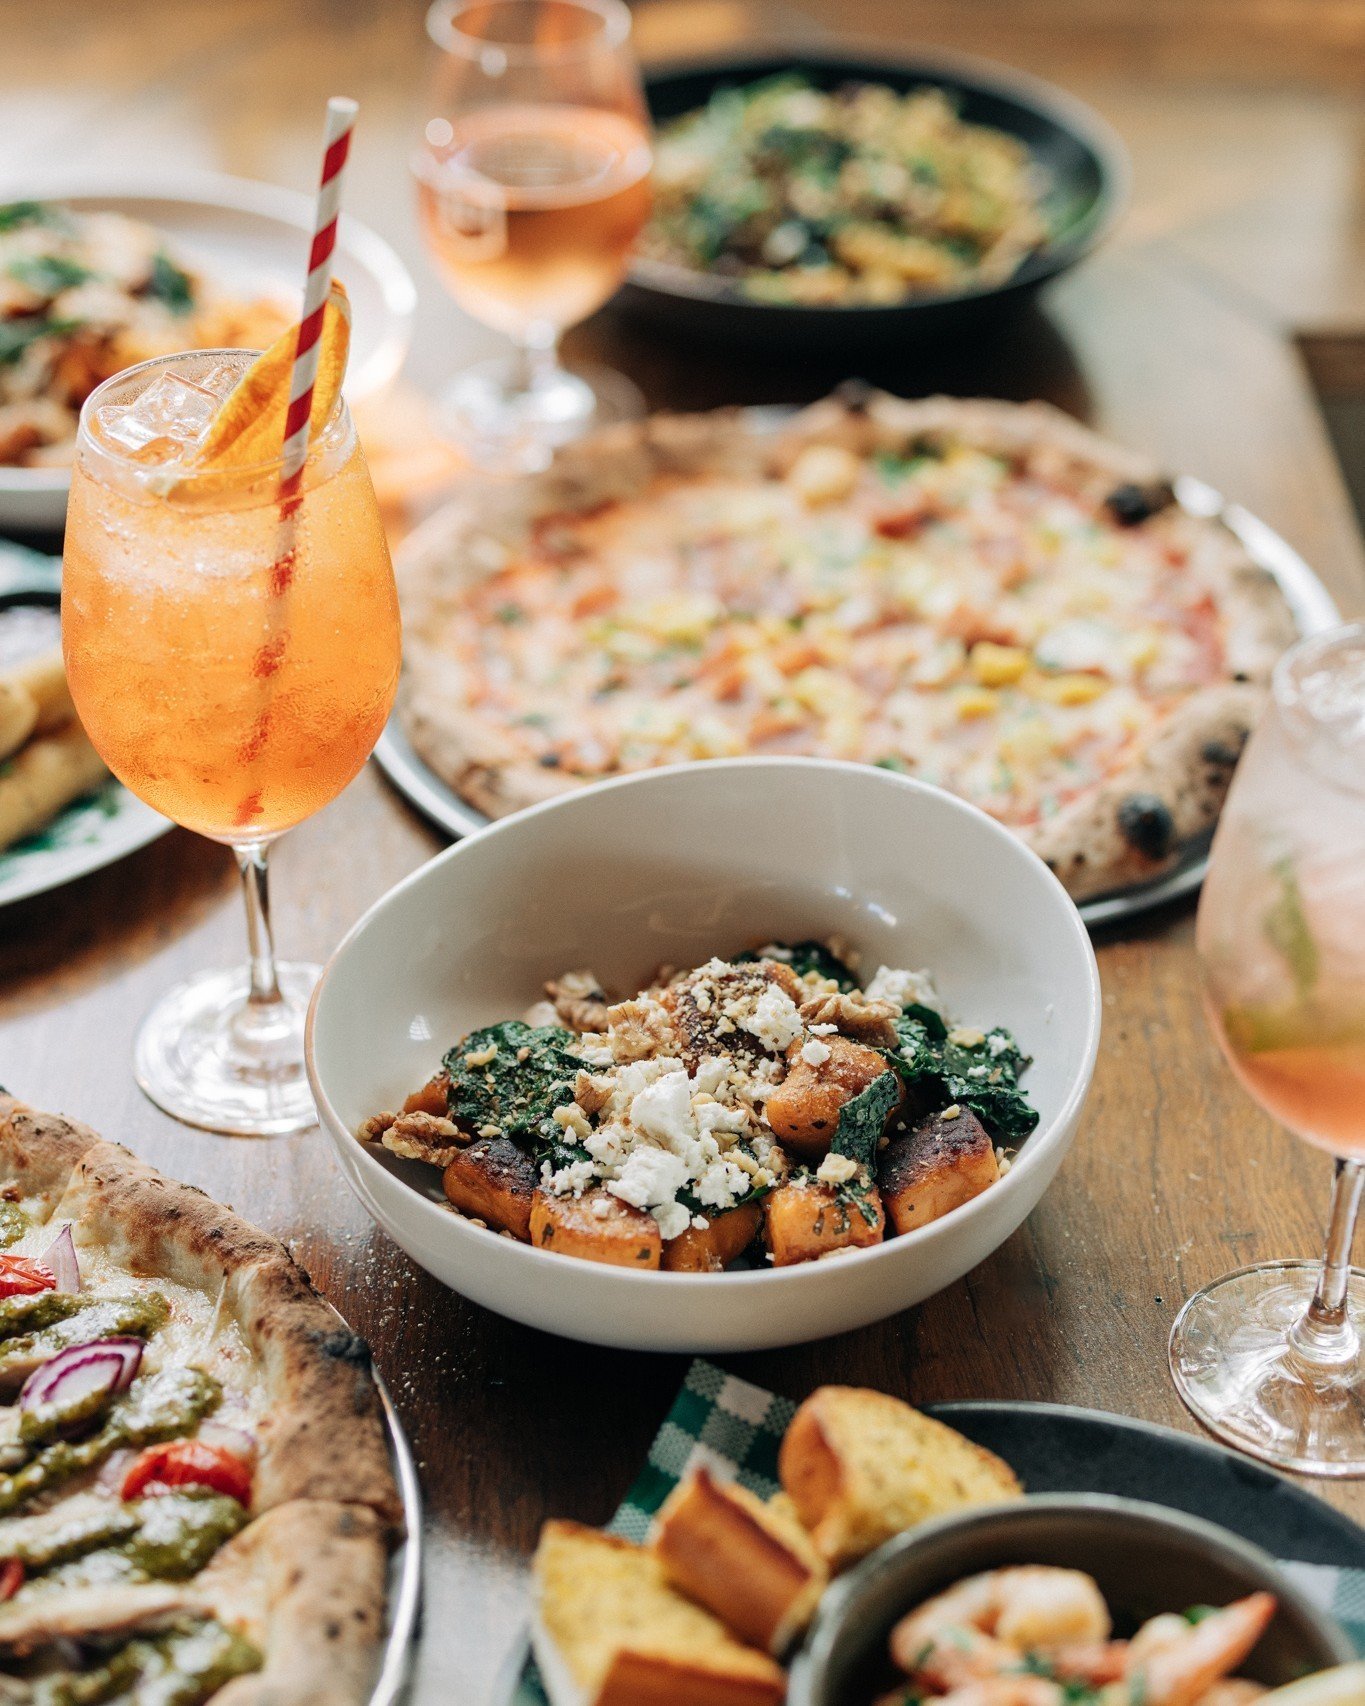 Mother&rsquo;s Day lunch? Say no more! 🥂
Bring Mum in for a delicious lunch, catered by our talented chefs! With modern Italian dishes and signature cocktails, this is one Mother&rsquo;s Day lunch she won&rsquo;t forget 👏

Book your table online no